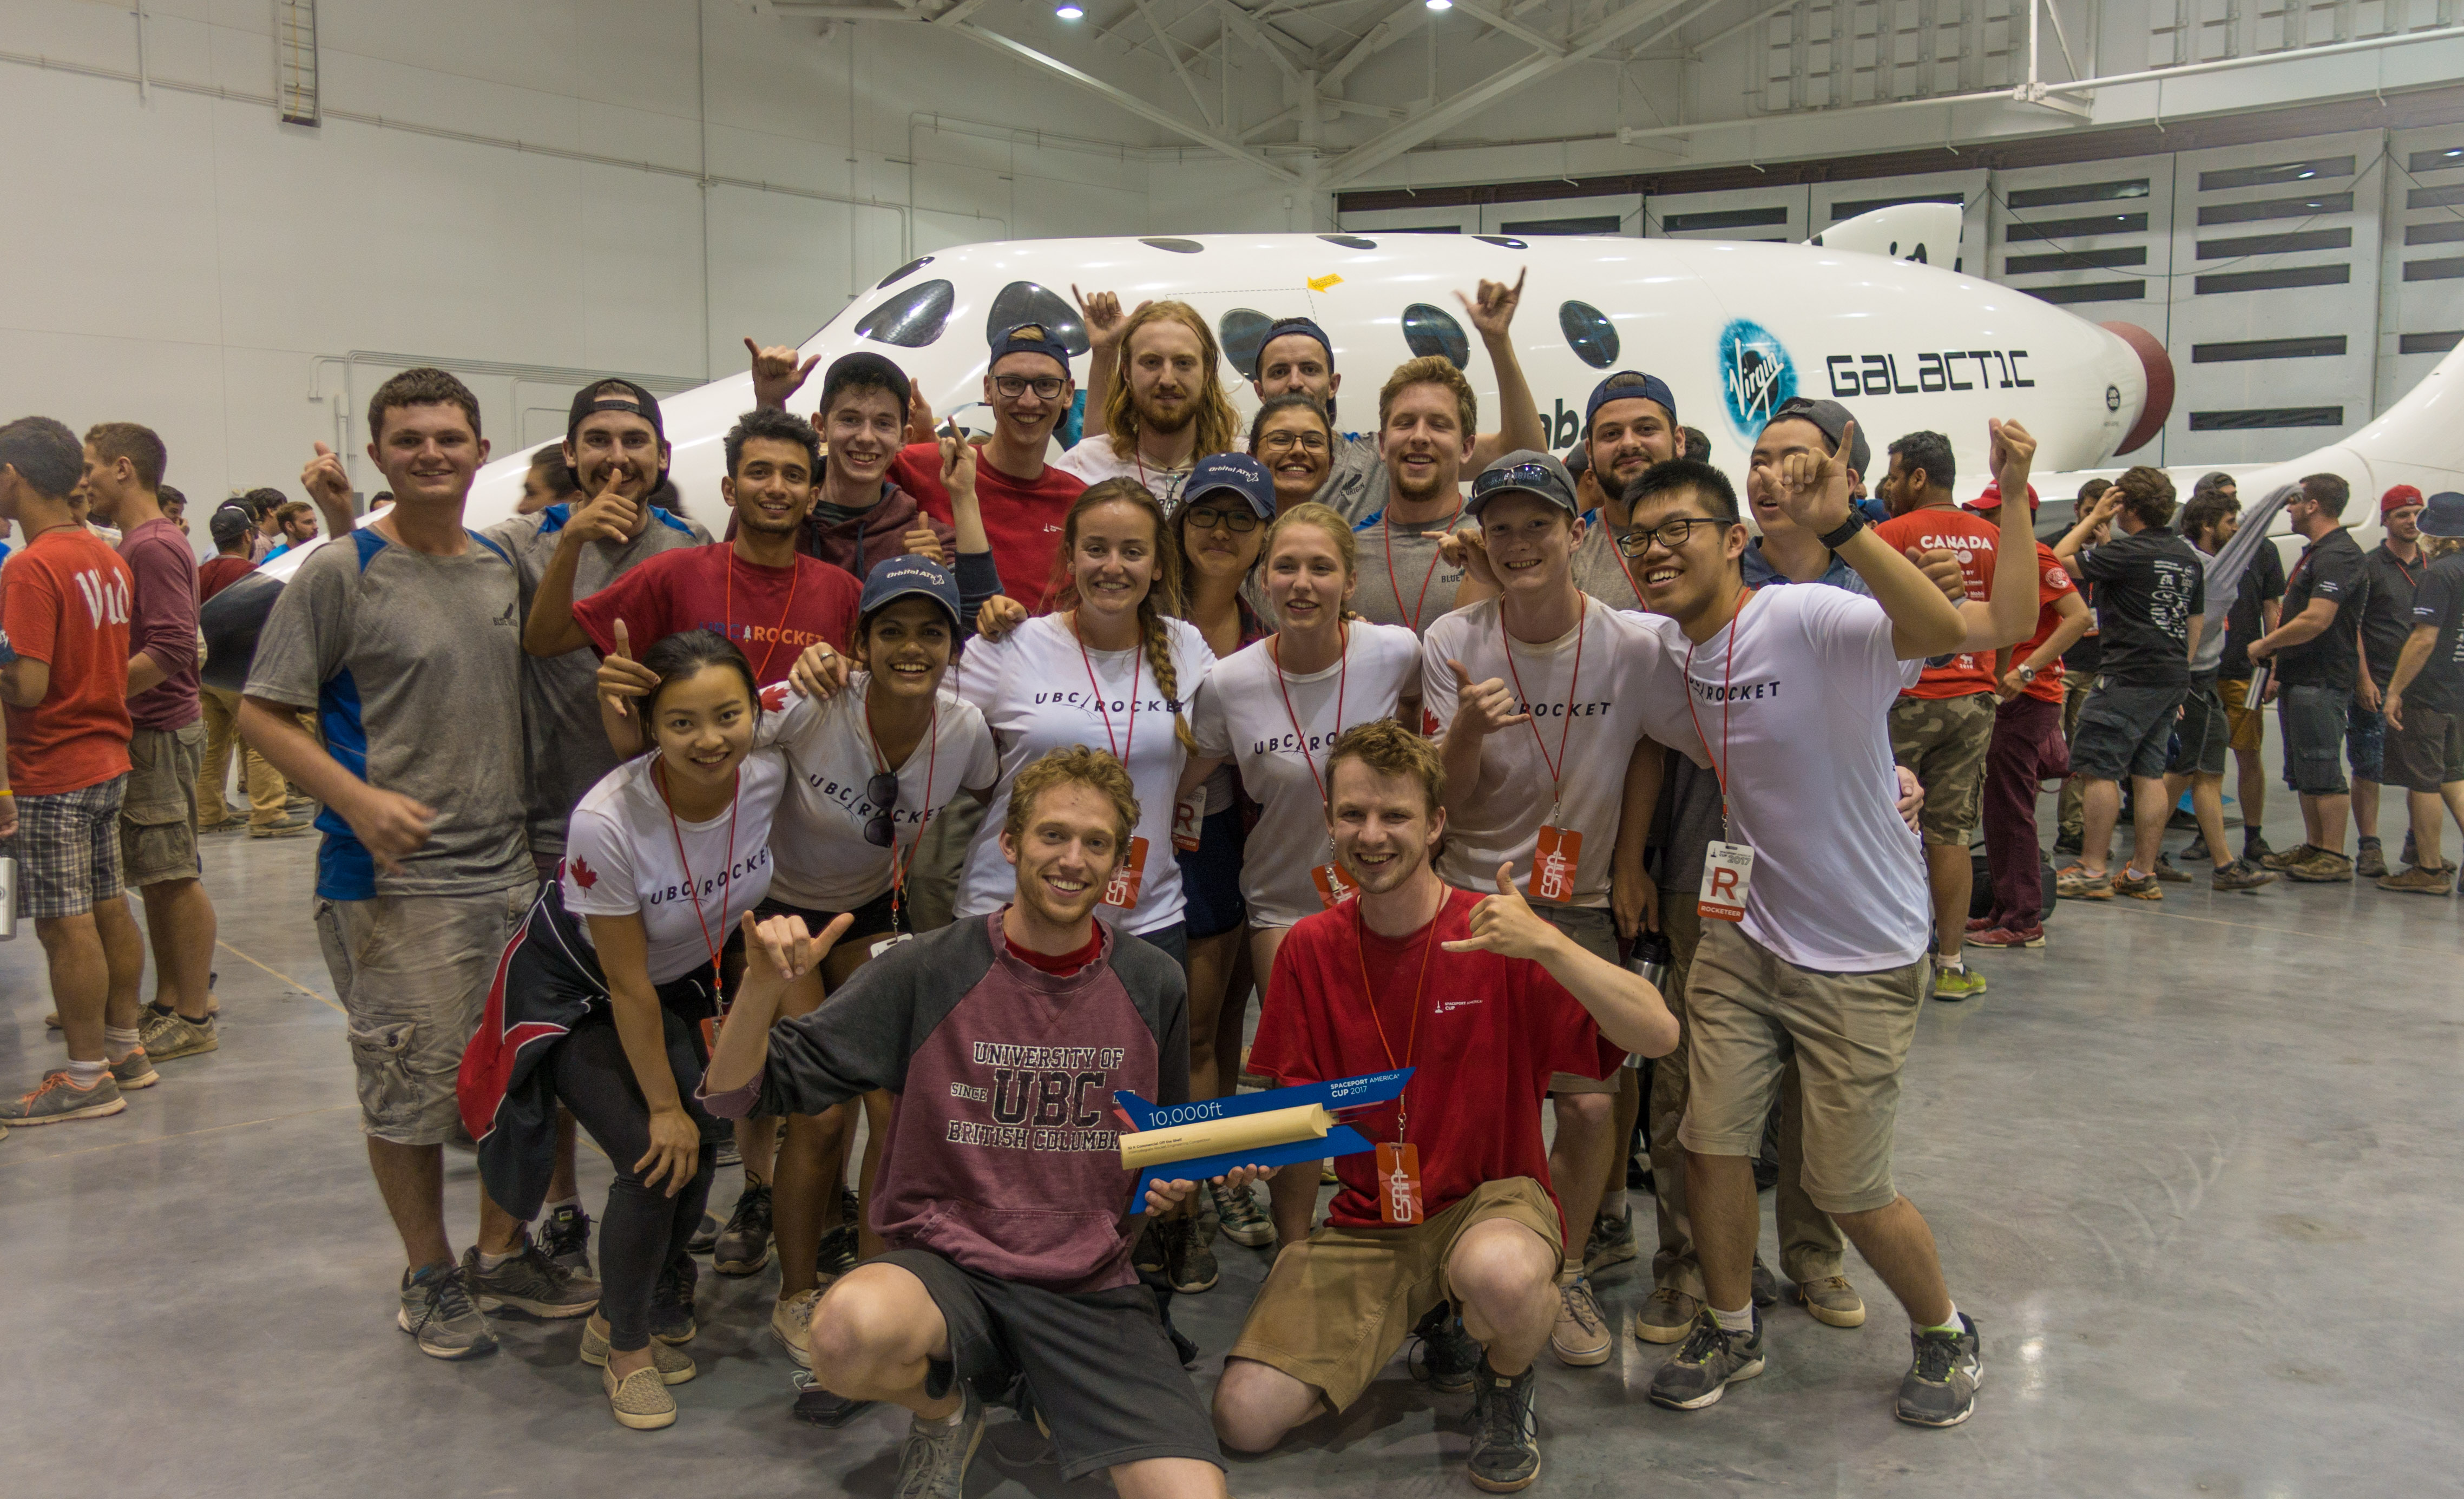 The stoked UBC Rocket team holding their Spaceport American Cup.